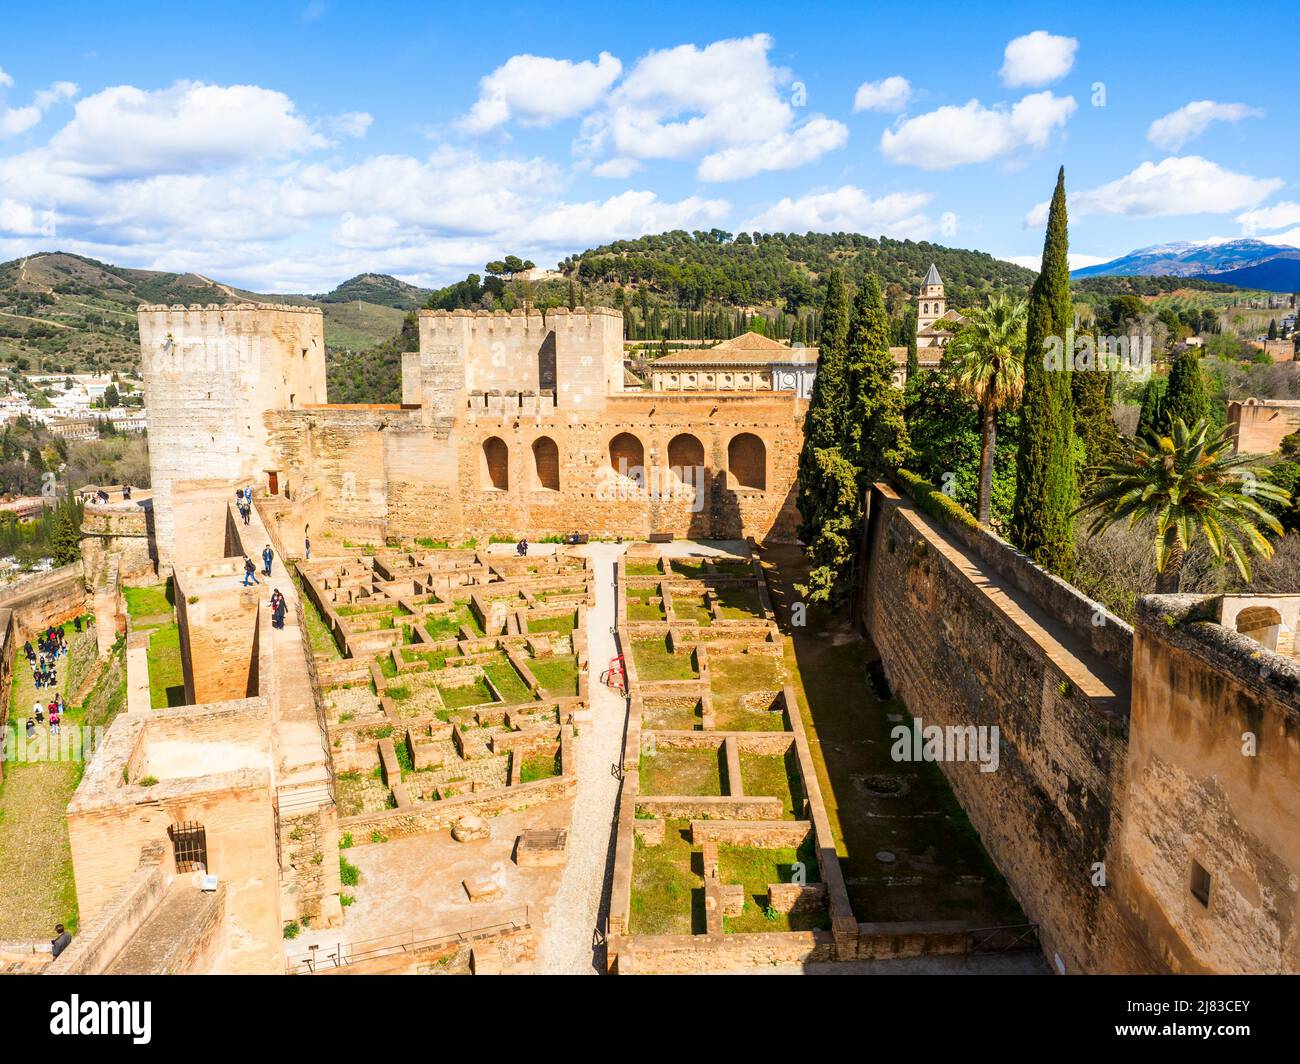 View from the Torre de la Vela, looking east across the Alcazaba's interior. The Torre del Homenaje is on the left, at the back, and the Torre Quebrada is to the right of it - Alhambra complex - Granada, Spain Stock Photo